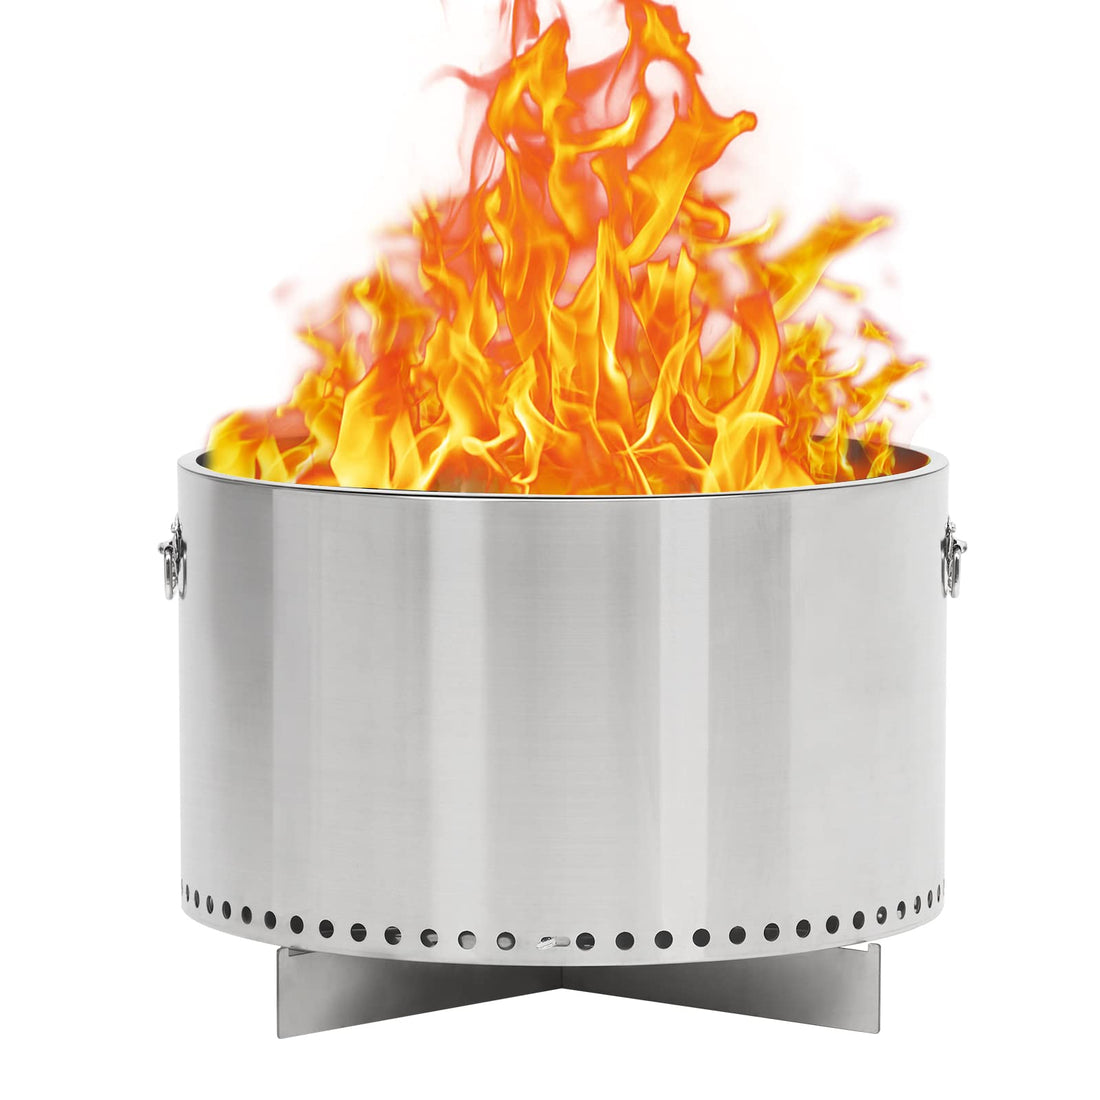 20.5 Inch Smokeless Fire Pit With Air Switch And Handle Wood Burning Portable Stainless Steel Outdoor Firepit